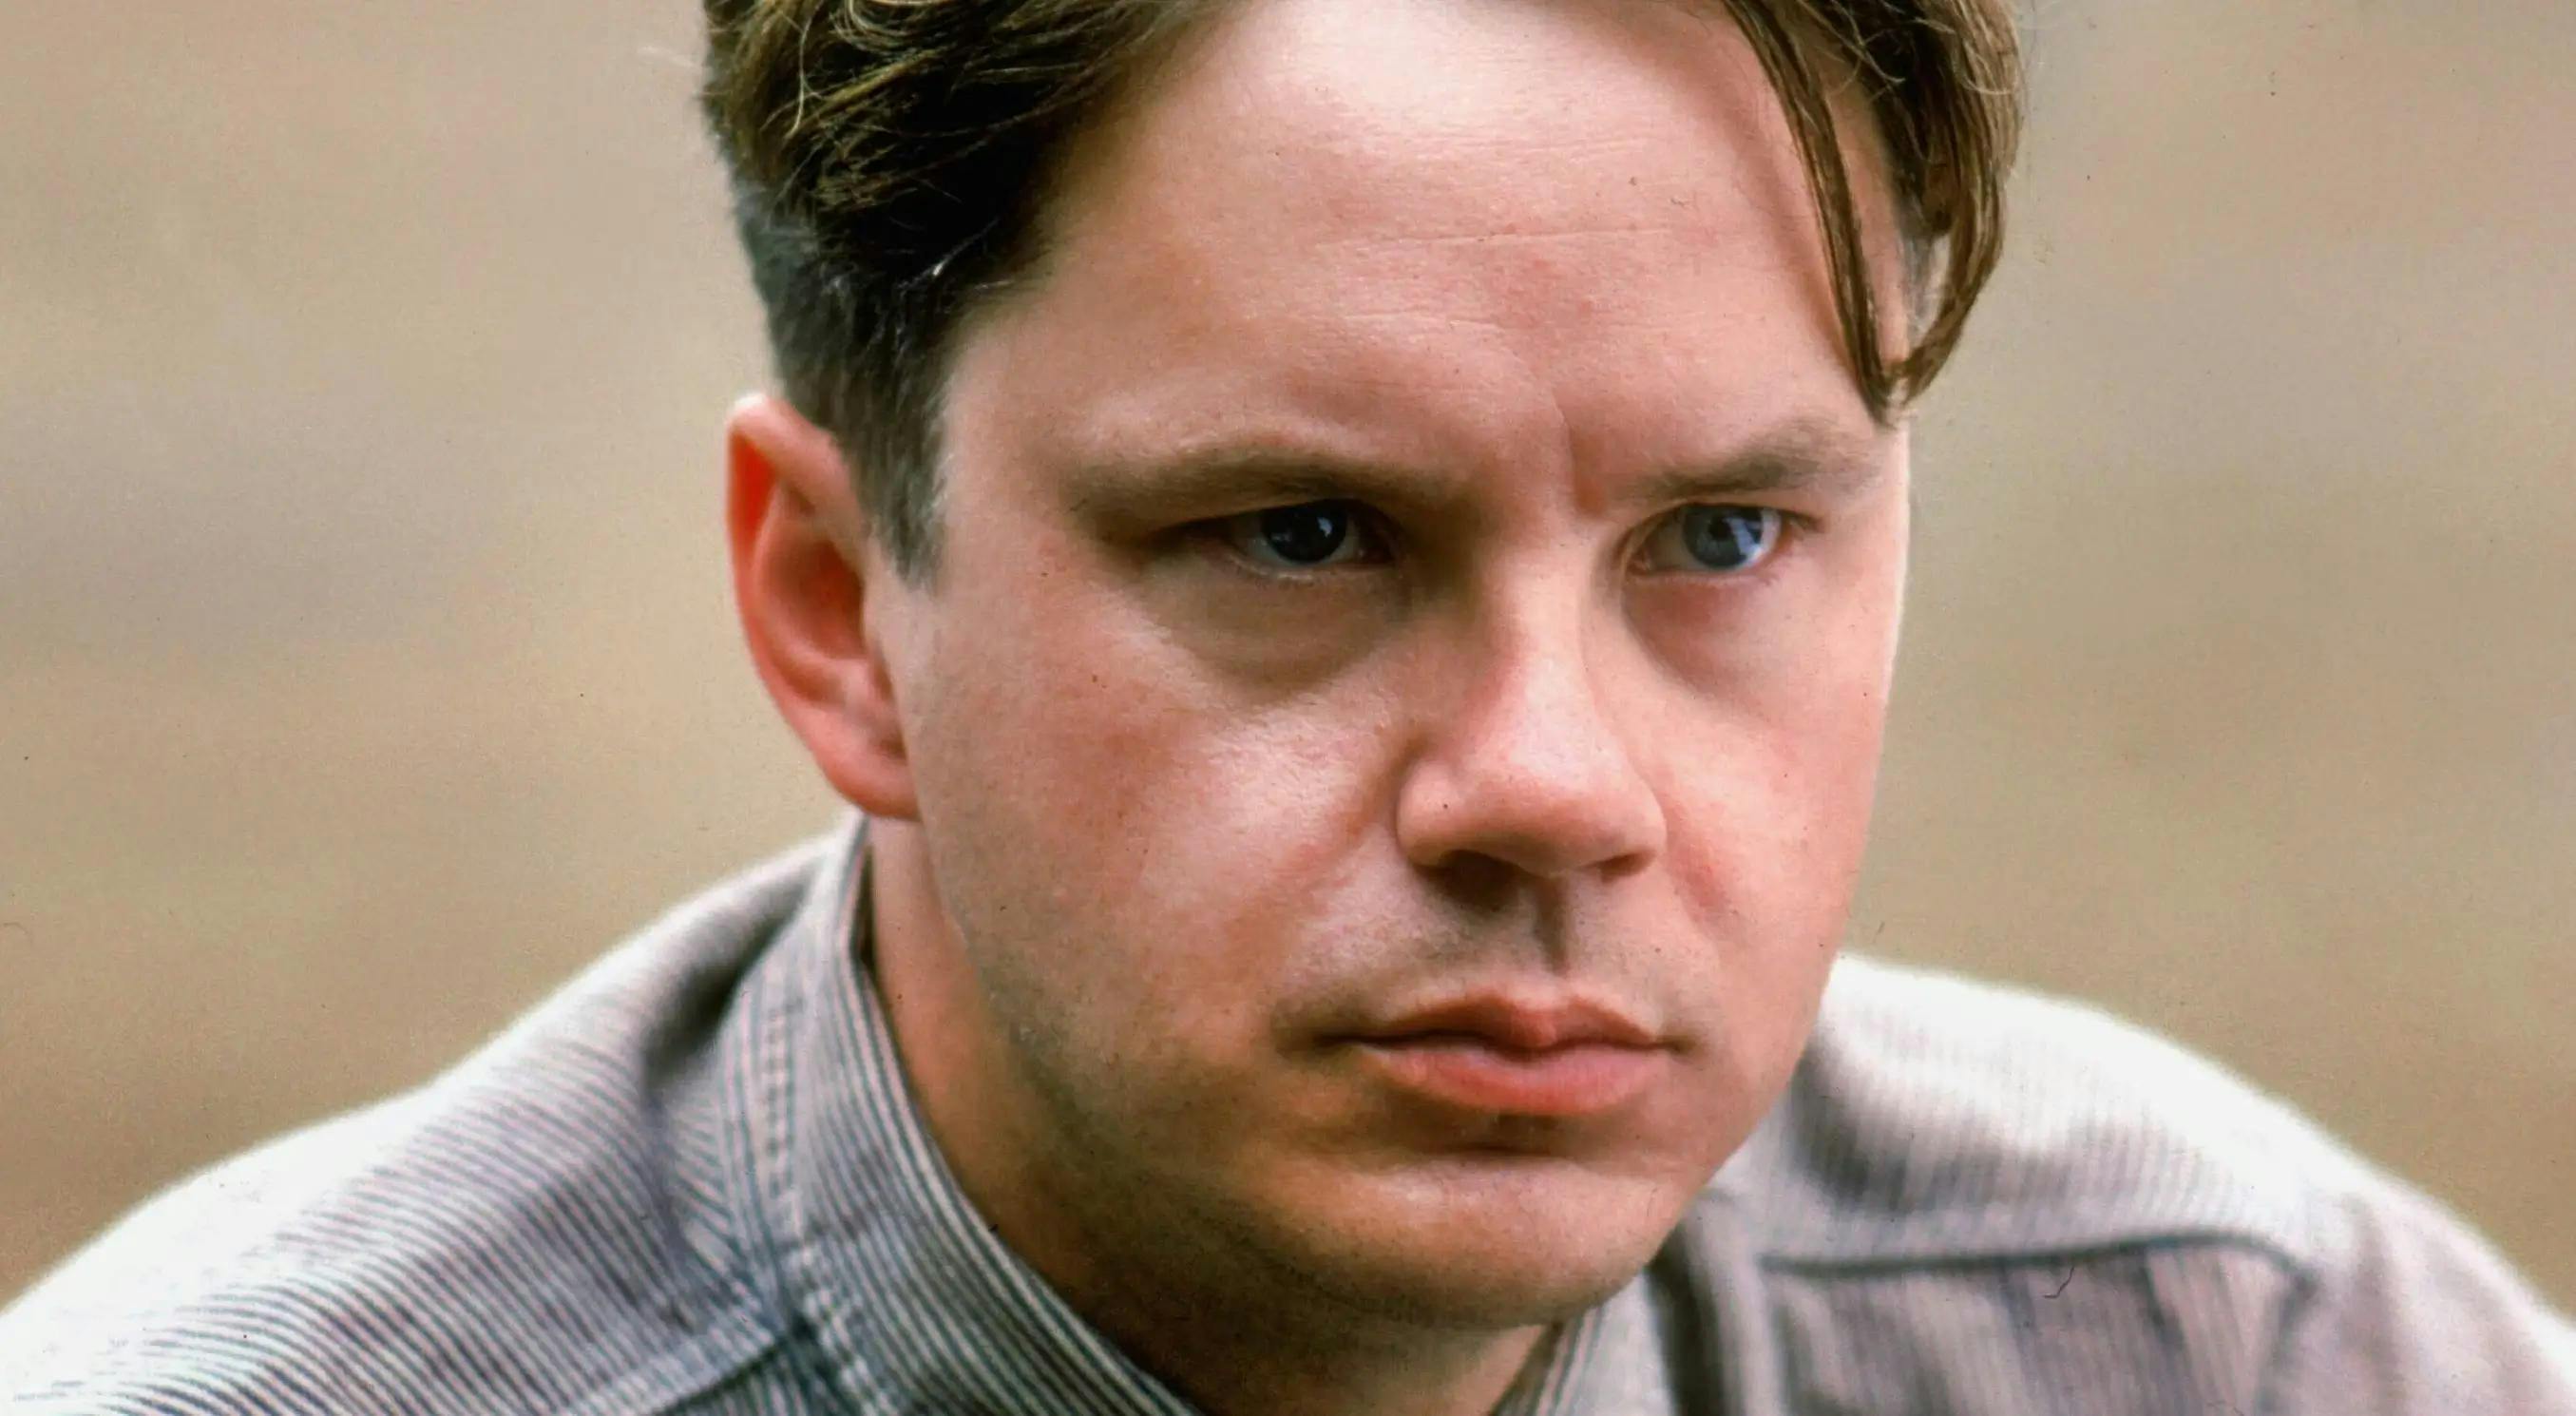 Personality type of Andy Dufresne